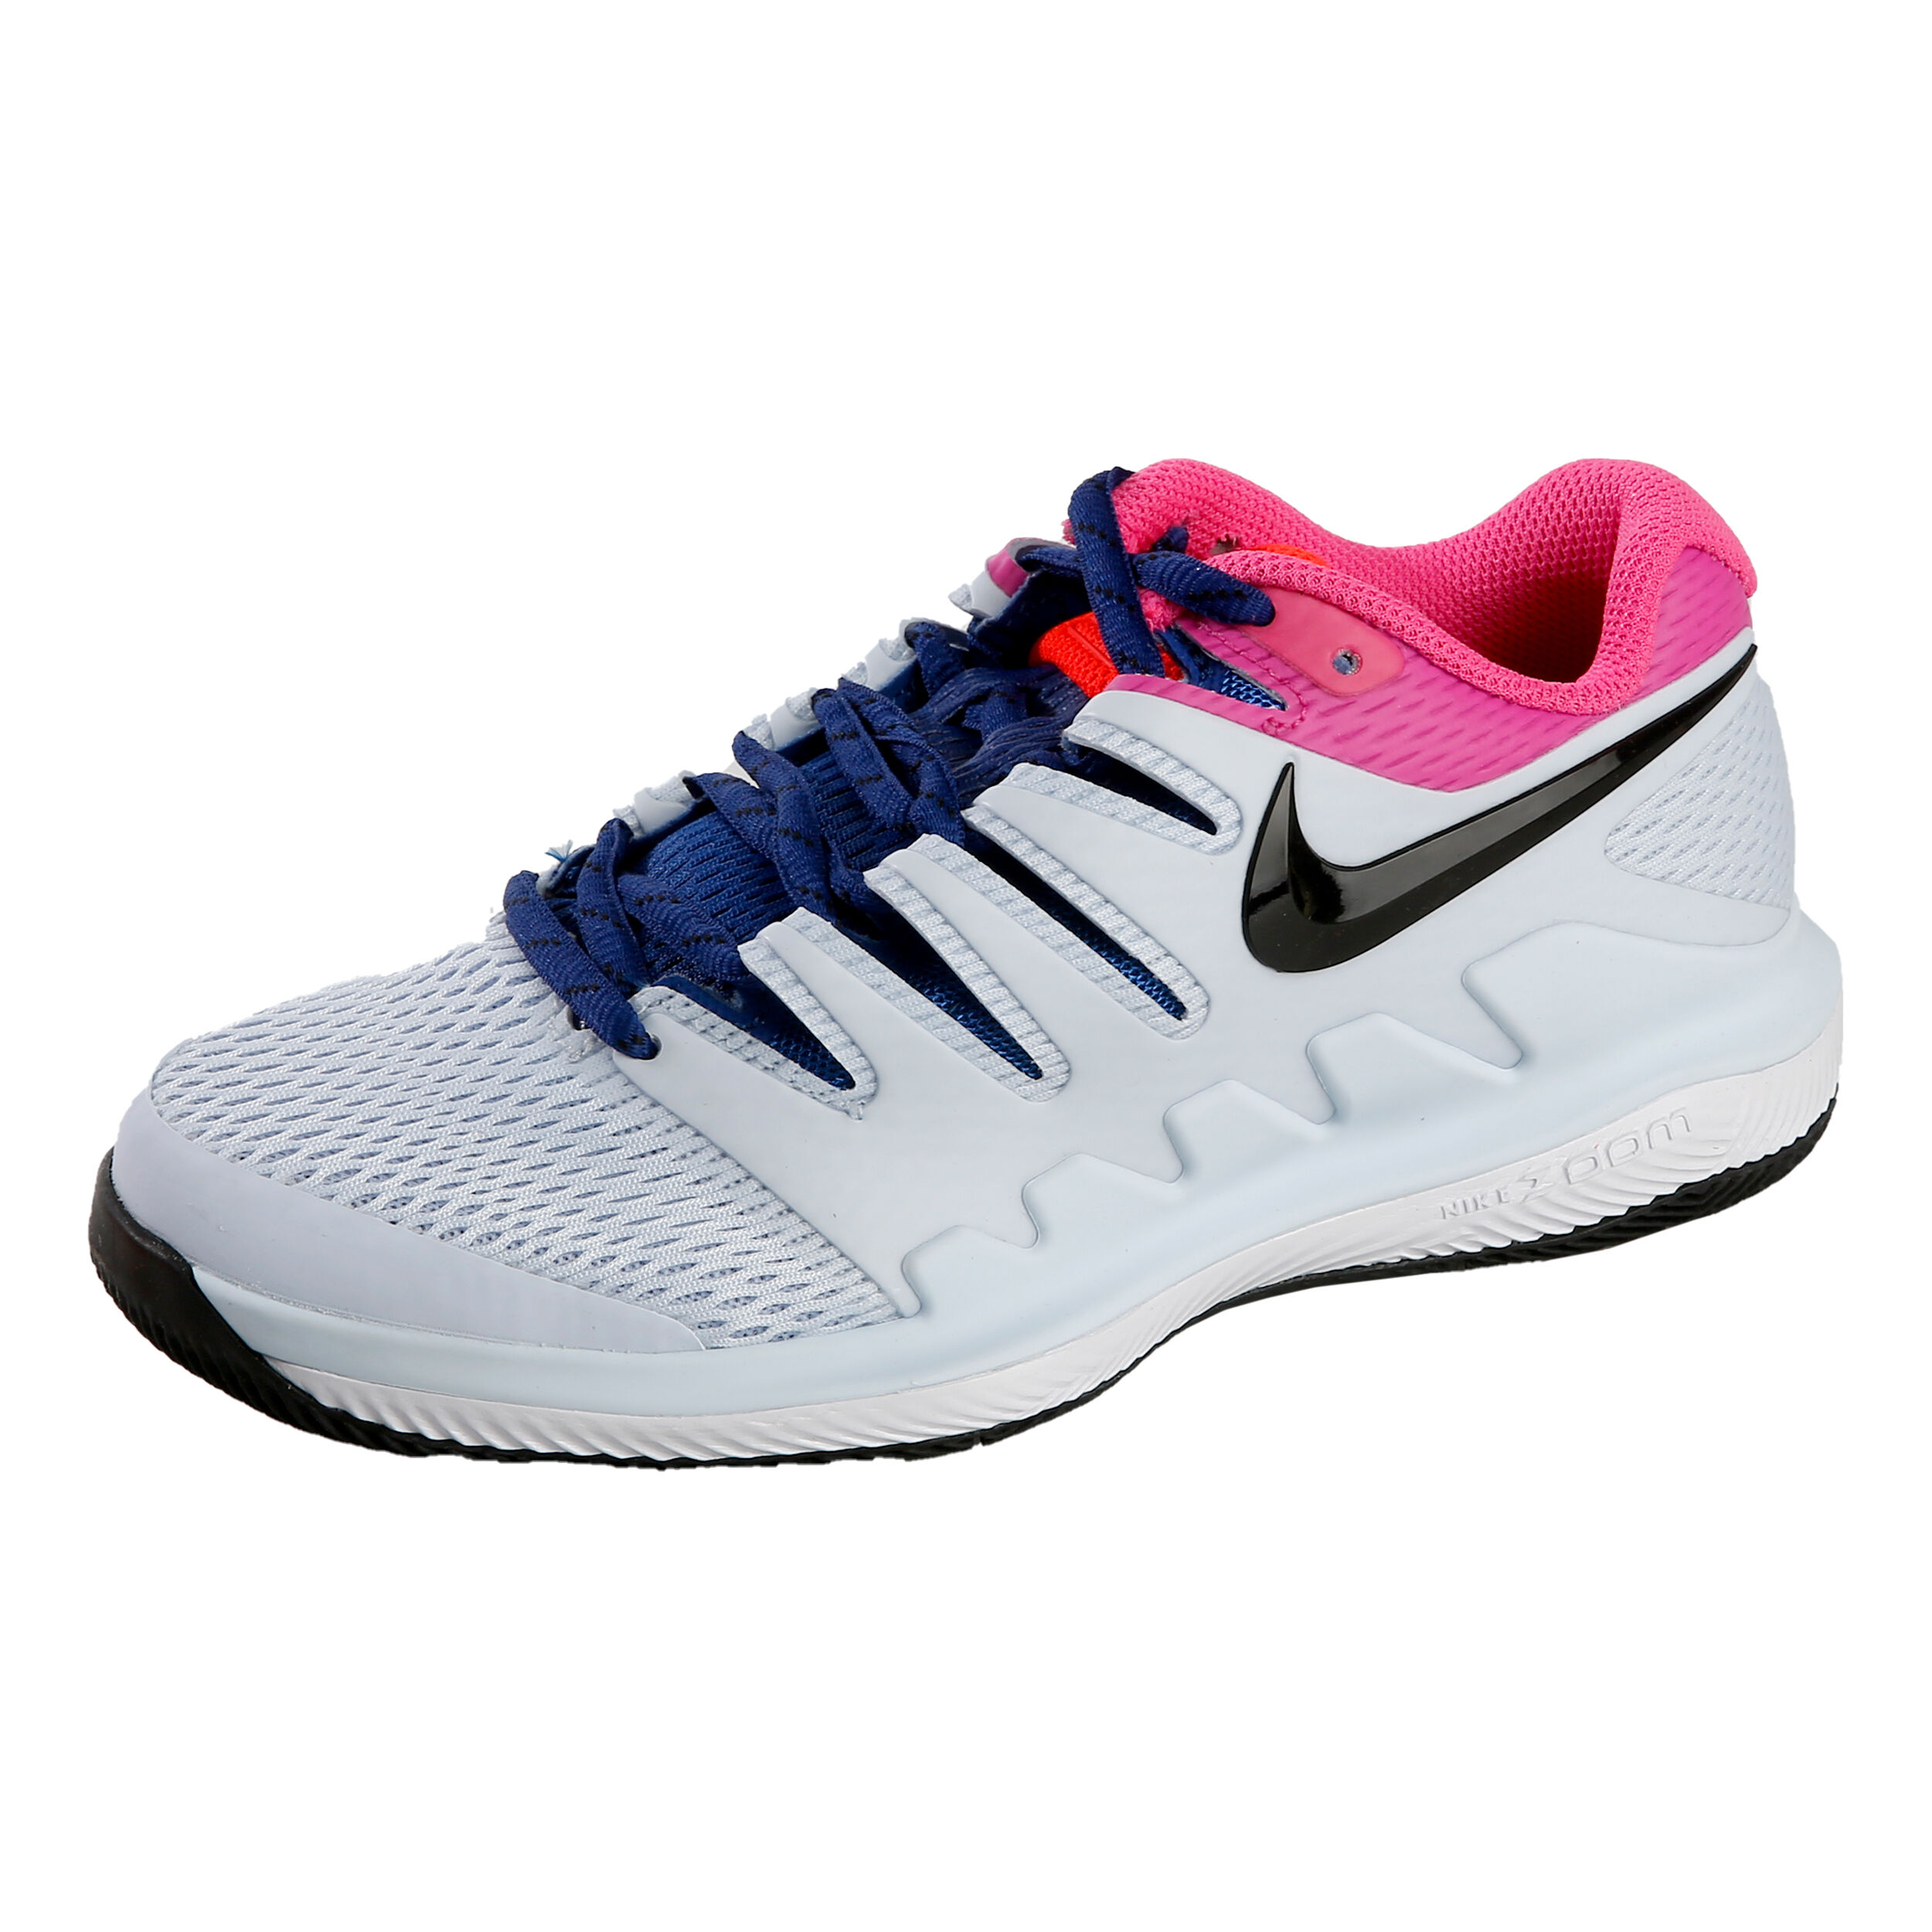 nike tennis shoes for kids